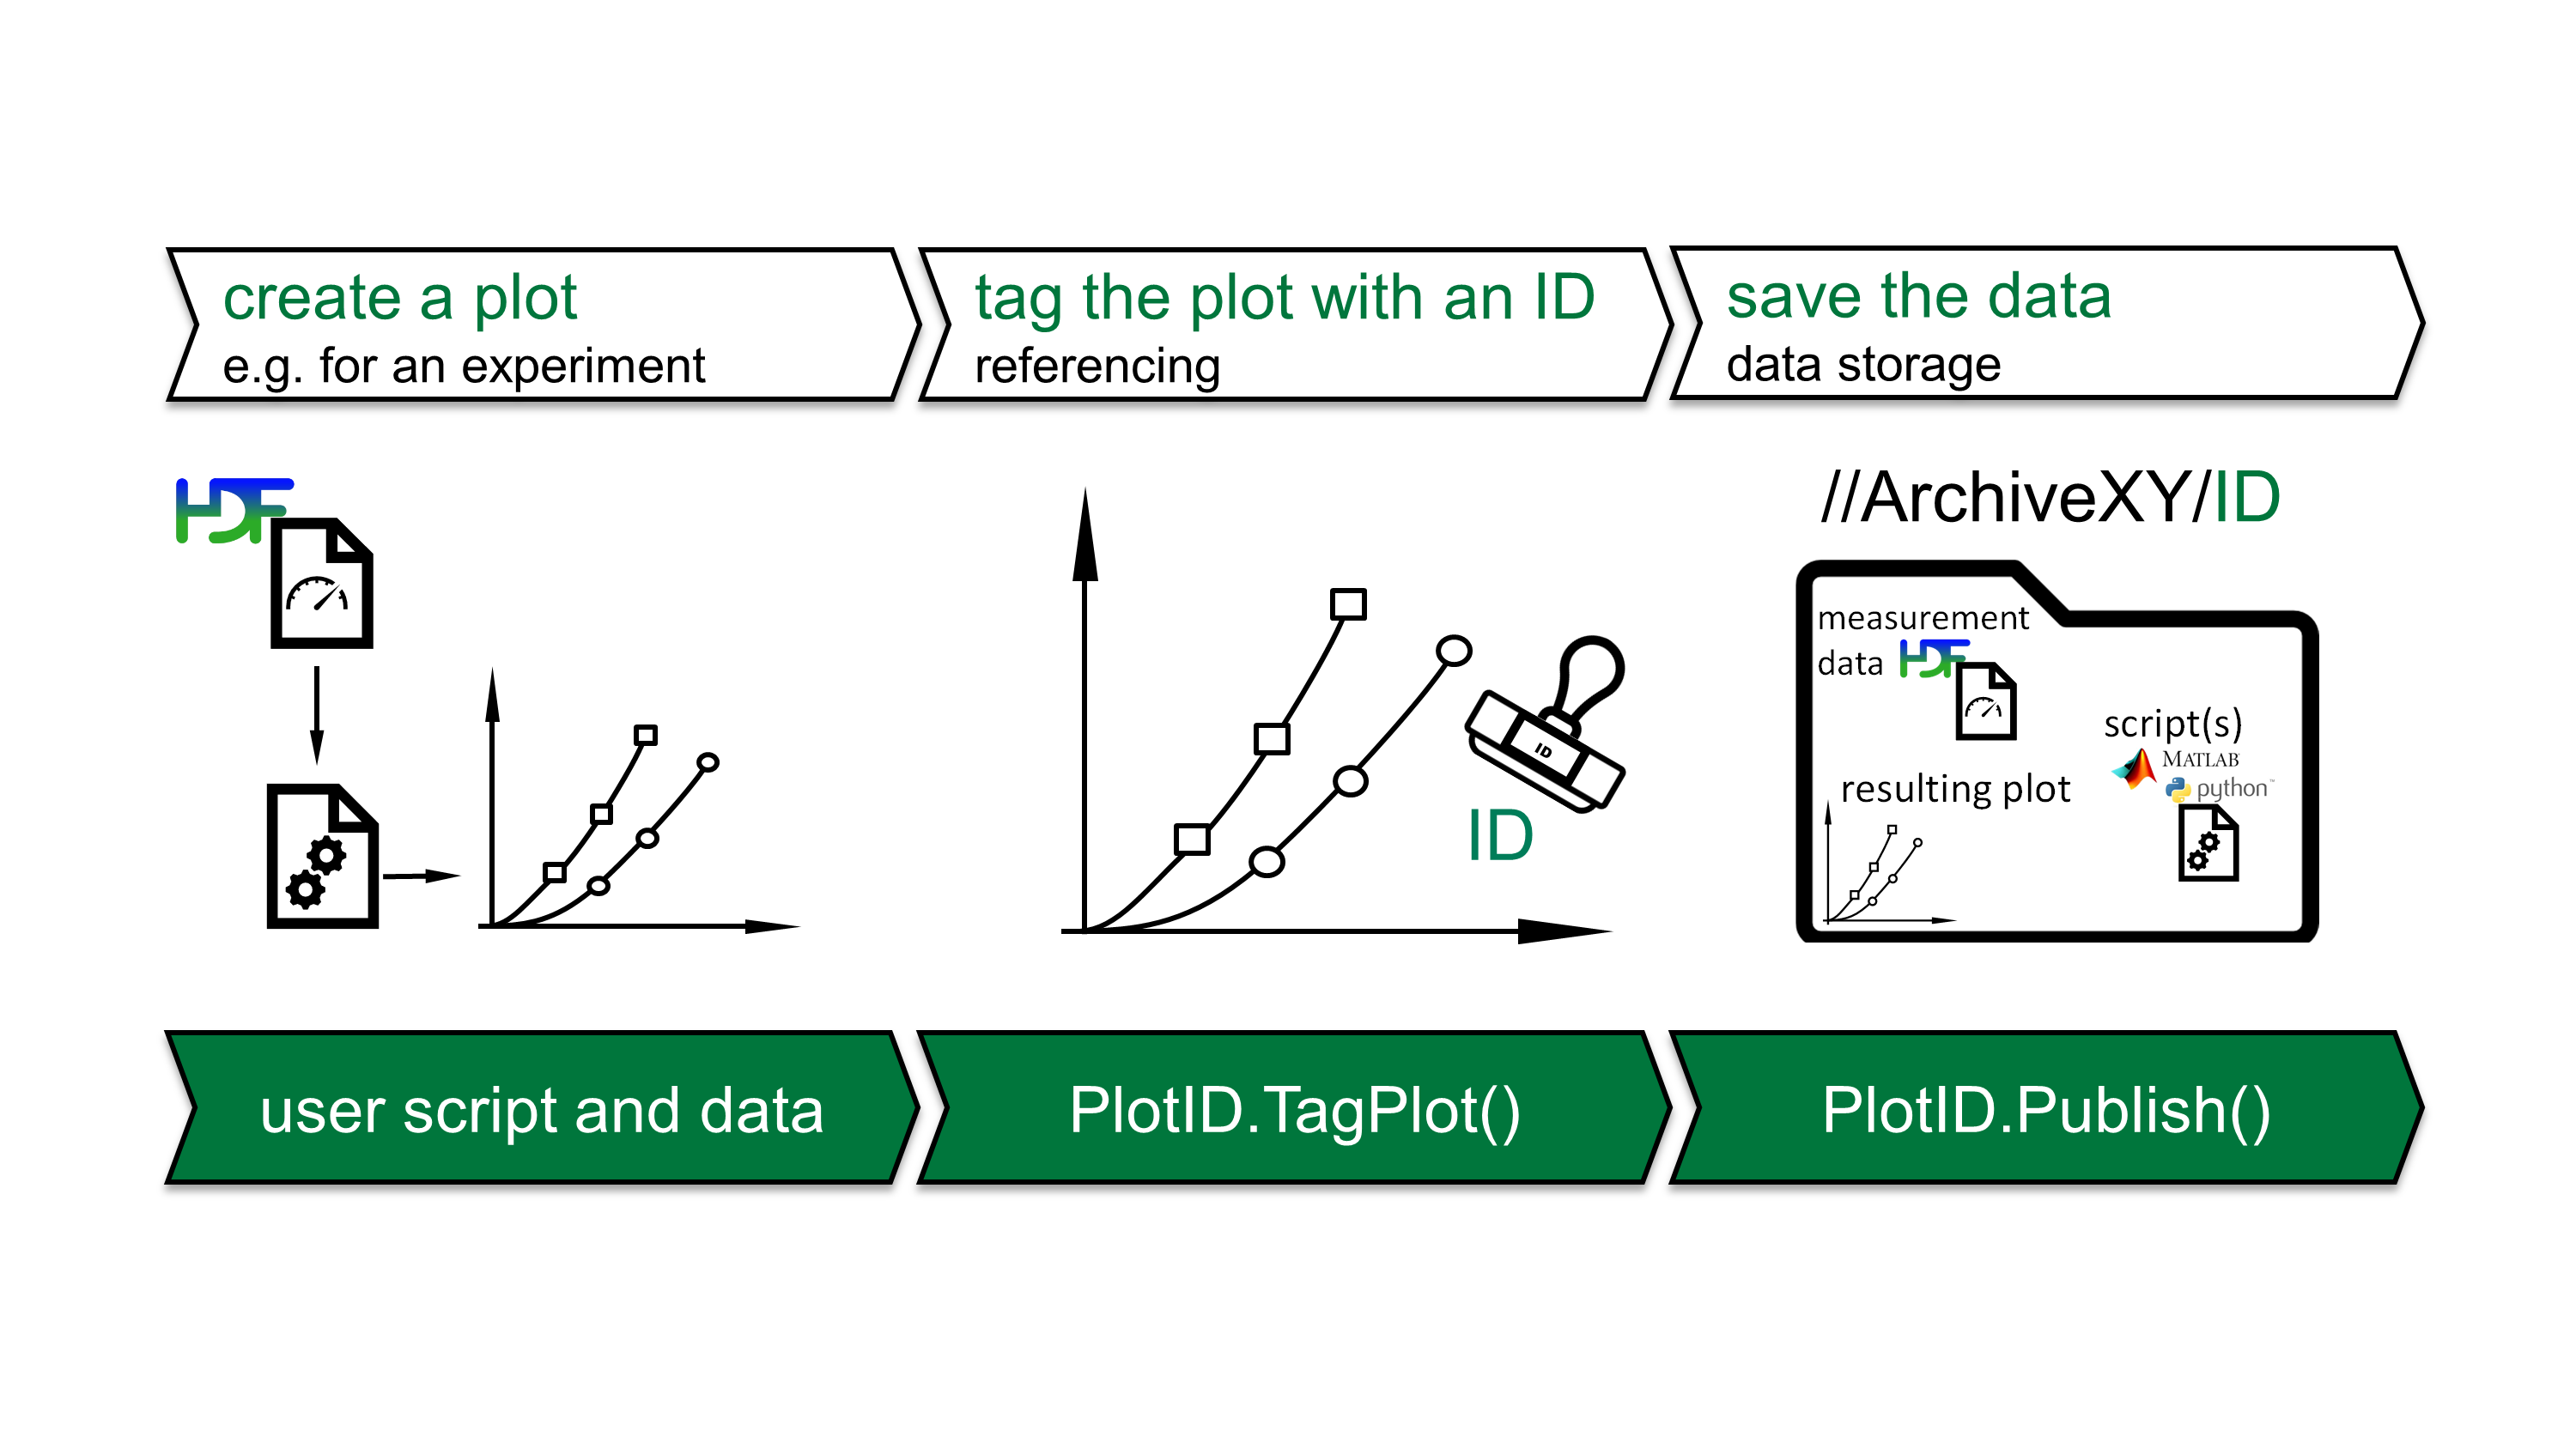 Schematic showing the three steps of creating a plot with data and code, tagging the plot with an ID collecting all components for archiving or sharing.